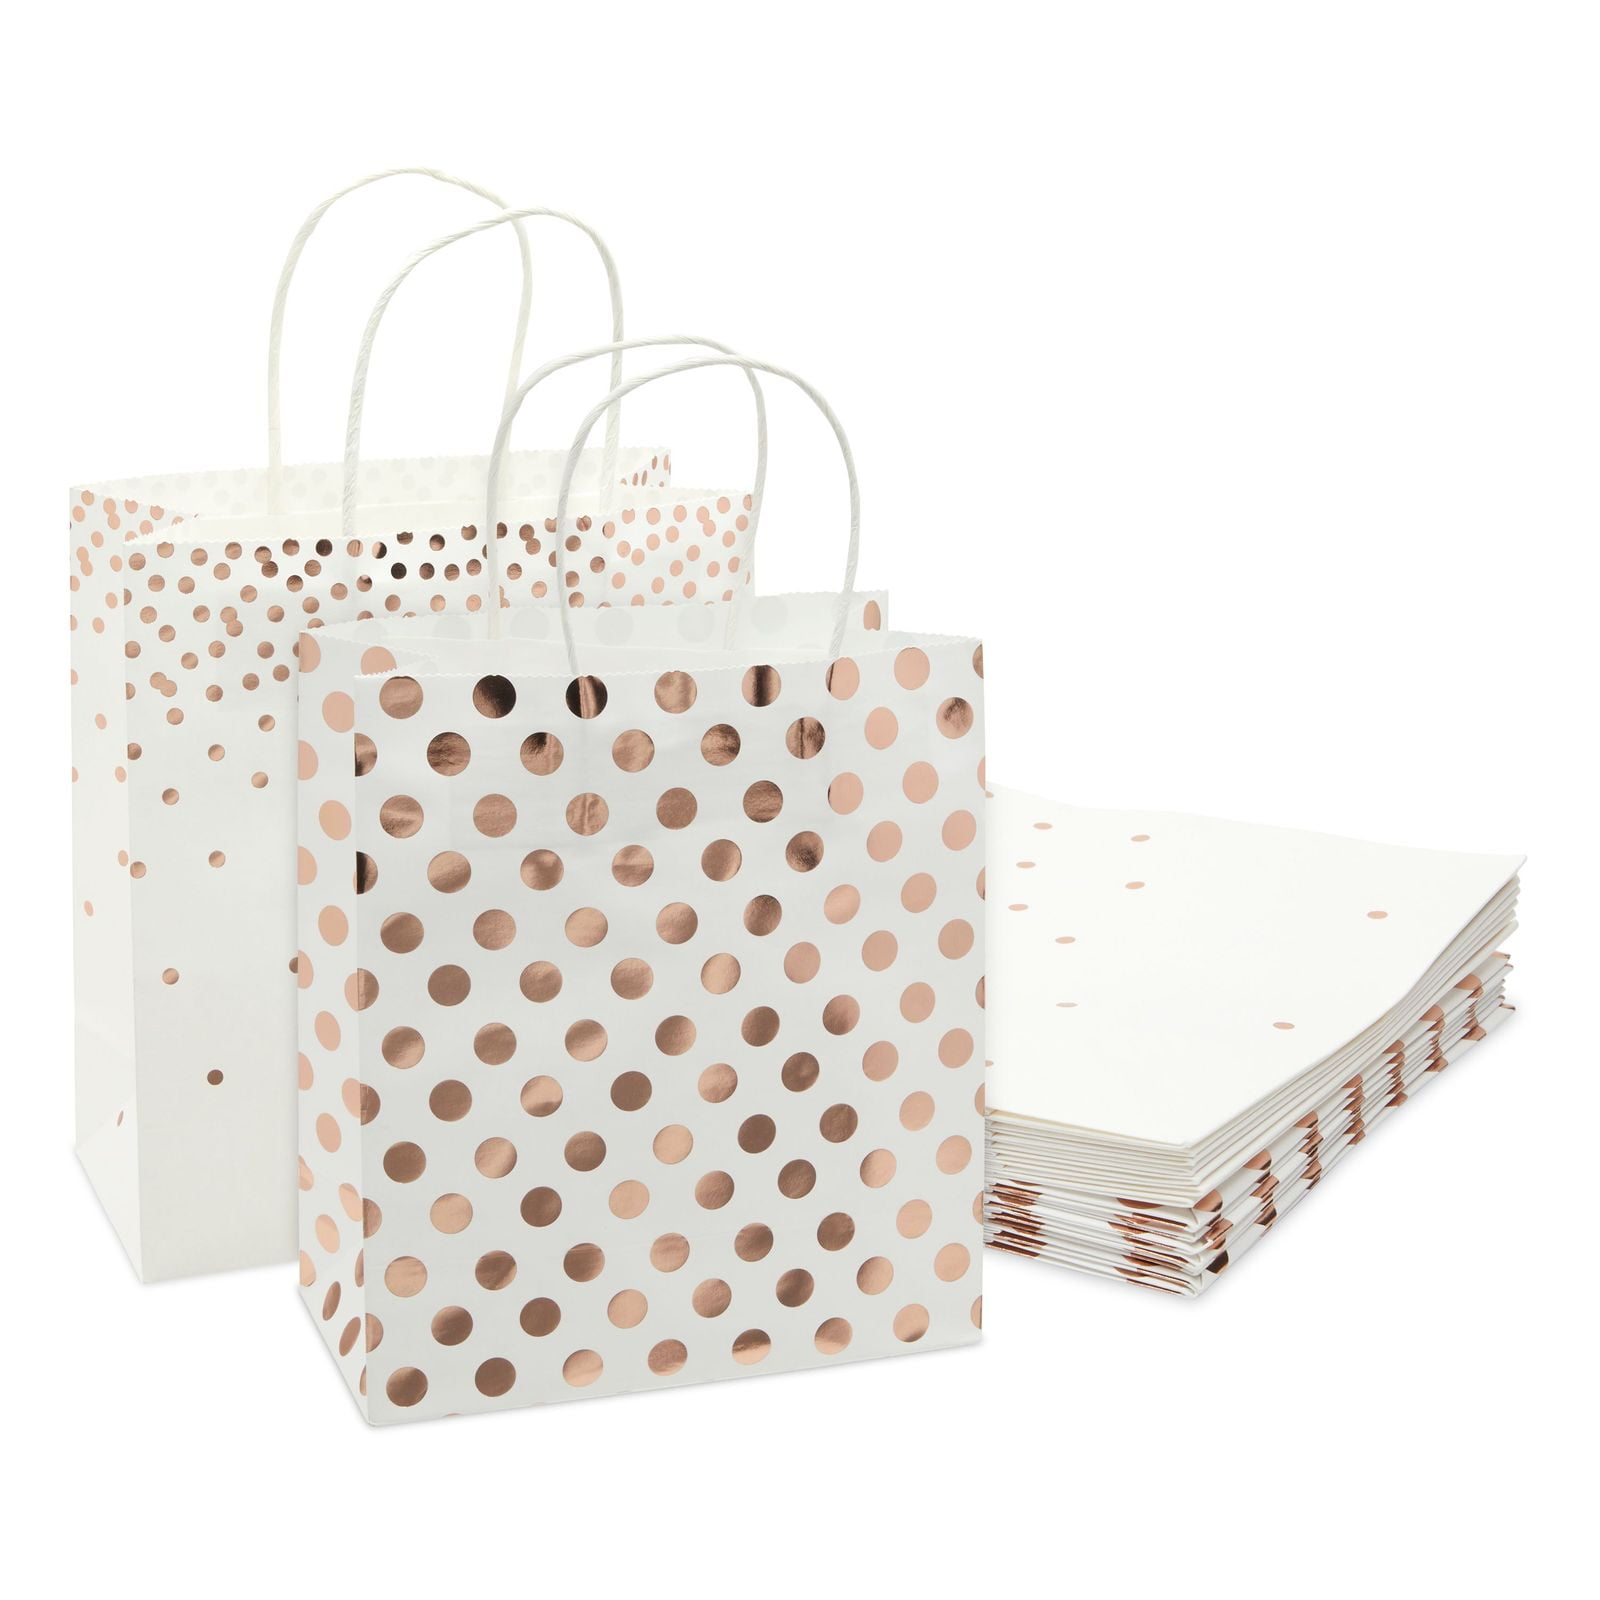 X5 Luxury Polka Dot Paper Party bithday /Carrier Gift Bags good quality 